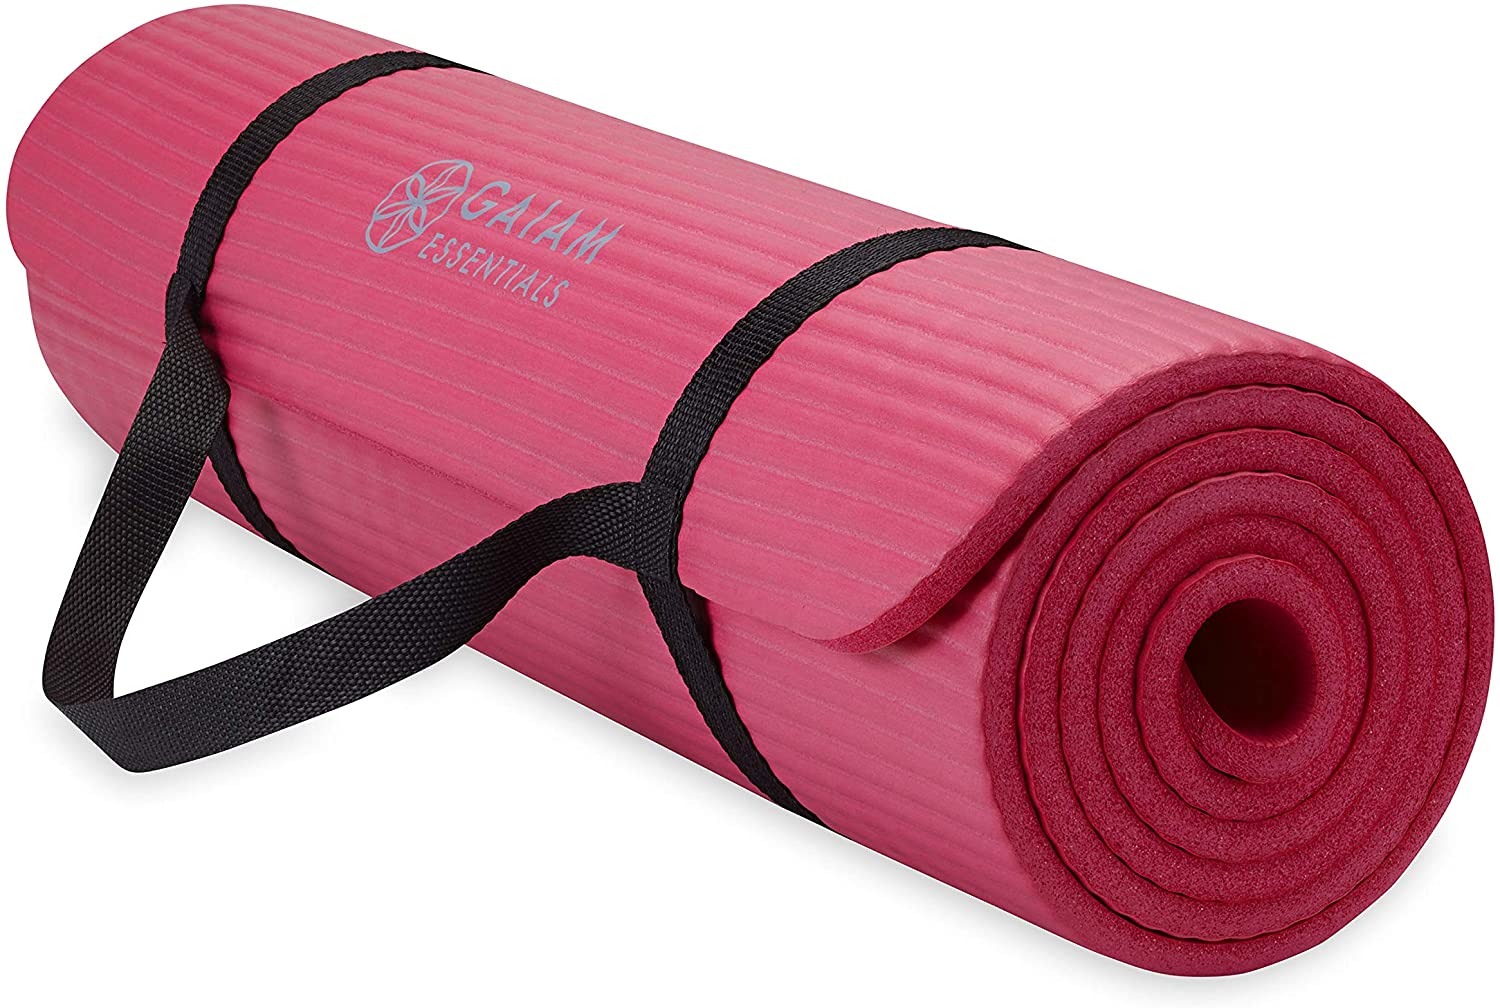 Shop LC Pink Yoga Mat for home workouts Non-Slip Nbr - 10Mm